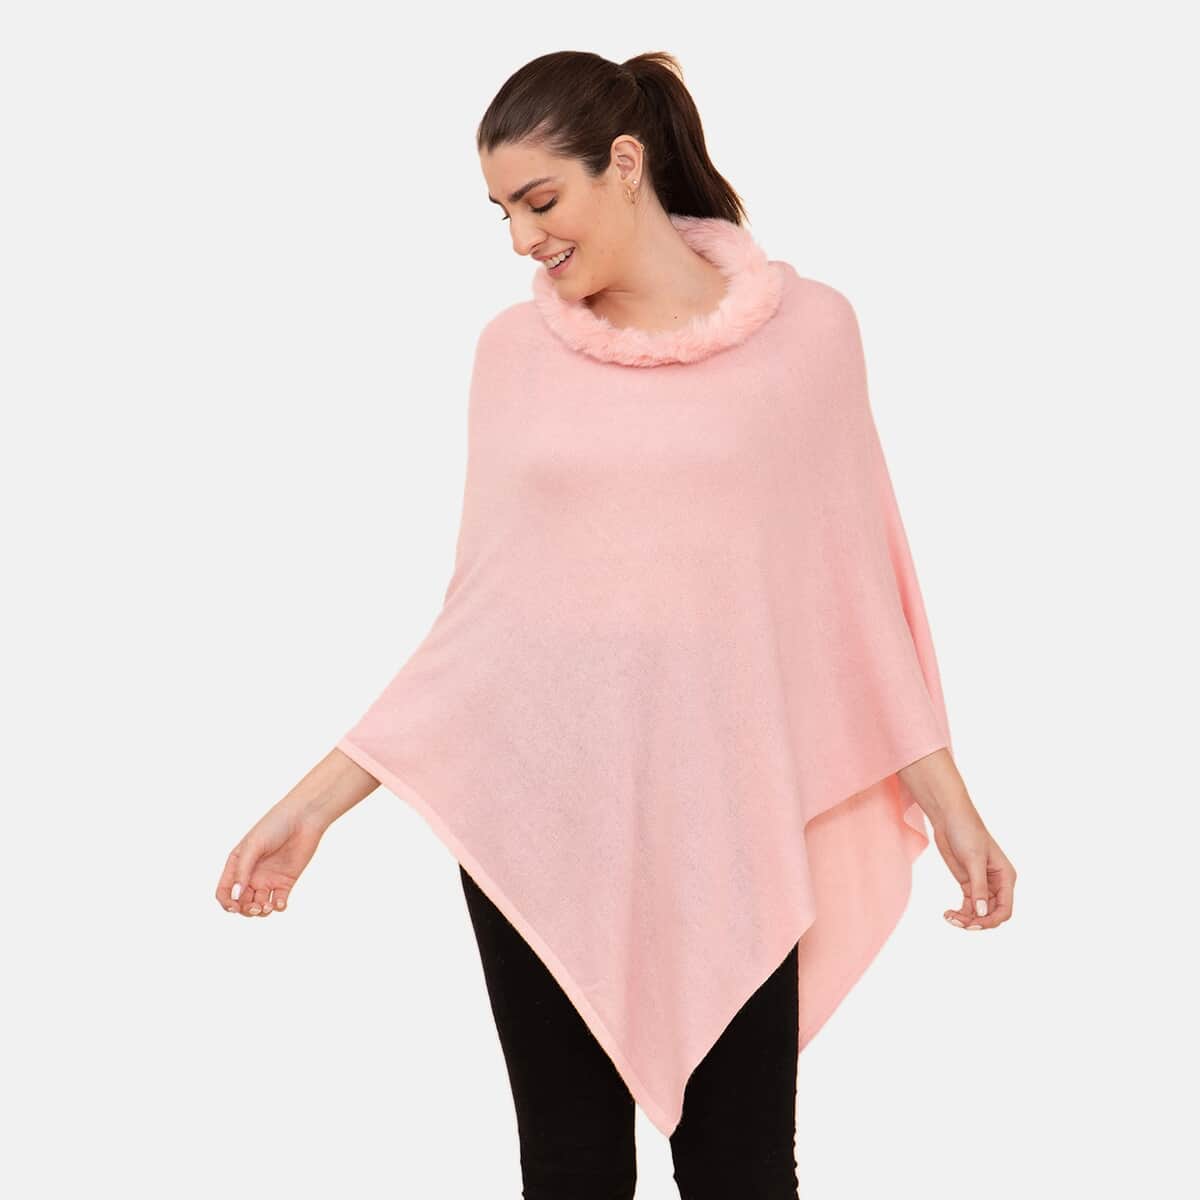 LA MAREY 100% Pashmina Cashmere Dusty Rose Designer Poncho for Women with Faux Fur Trim - One Size Fits Most , Cashmere Poncho , Women Capes , Poncho Scarf image number 2